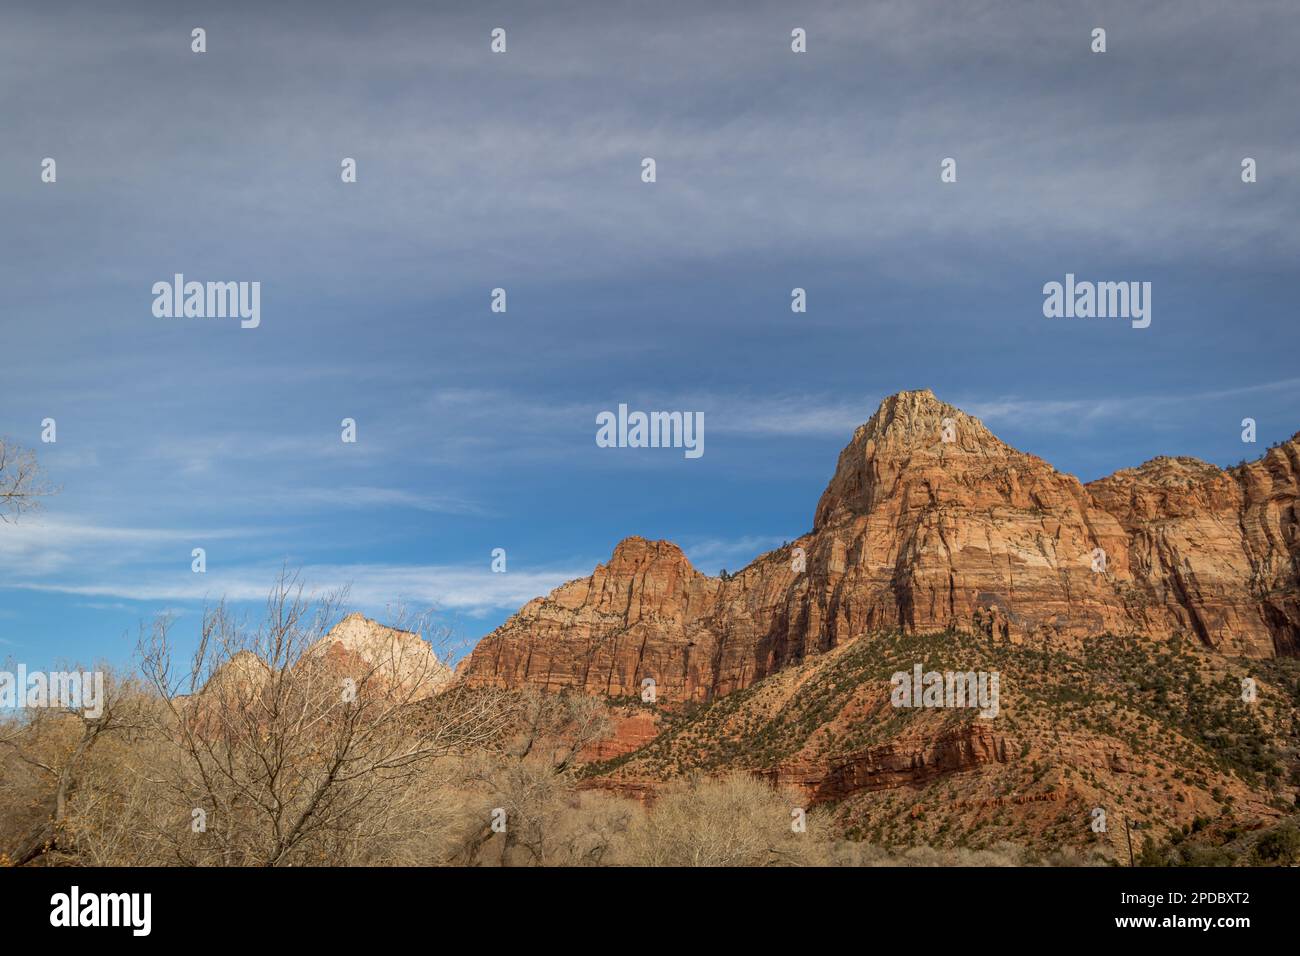 Bridge Mountain in the day at Zion National Park, Utah Stock Photo